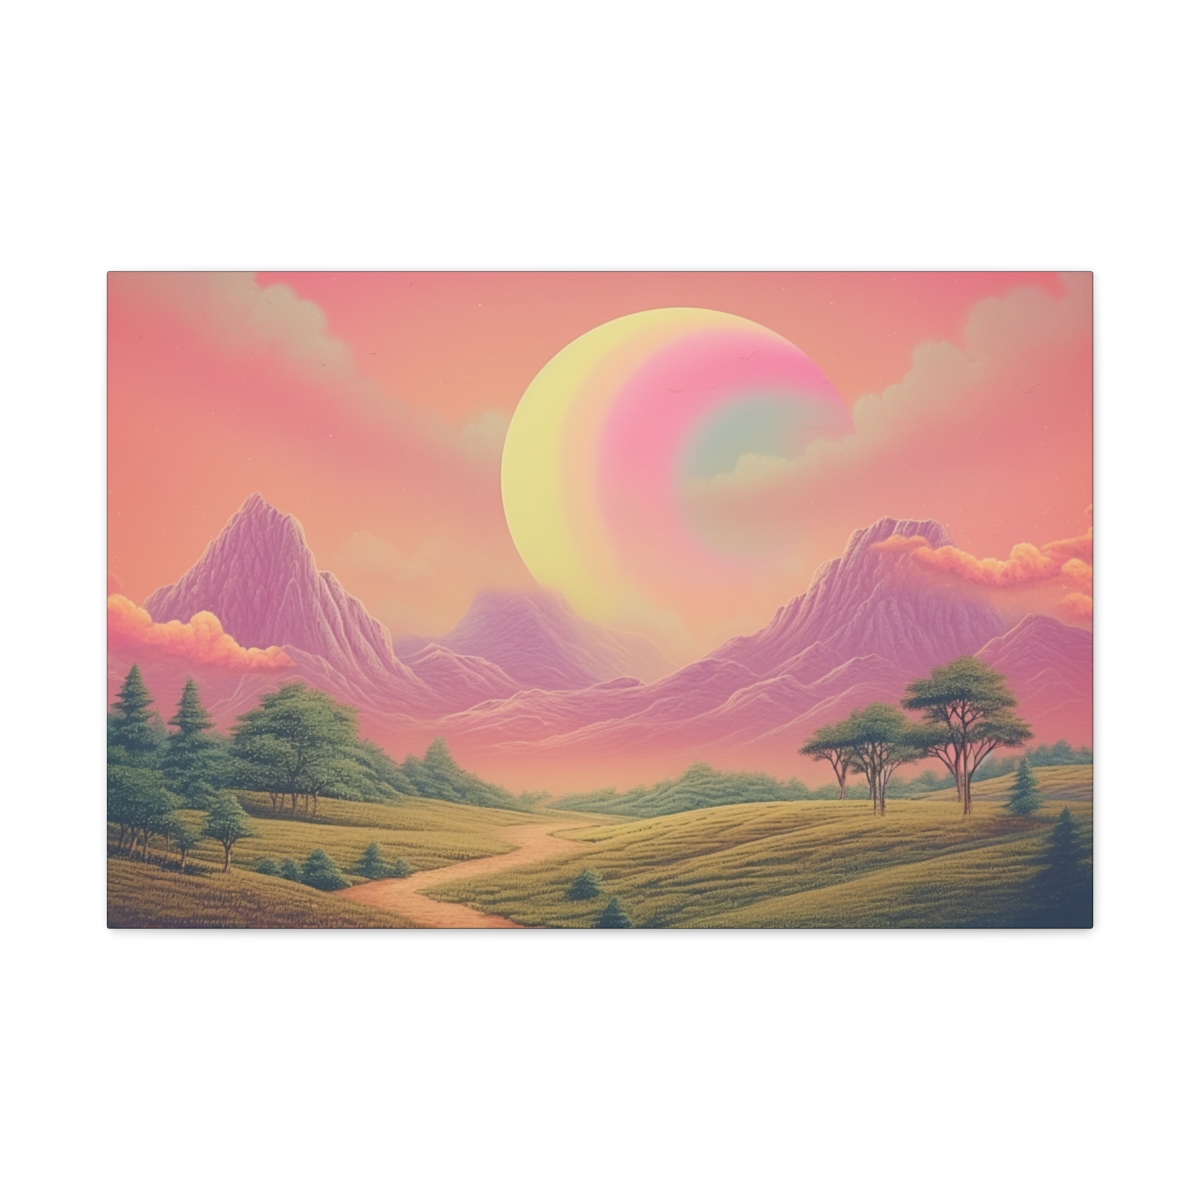 Ethereal Art: Mountains Of Dreams